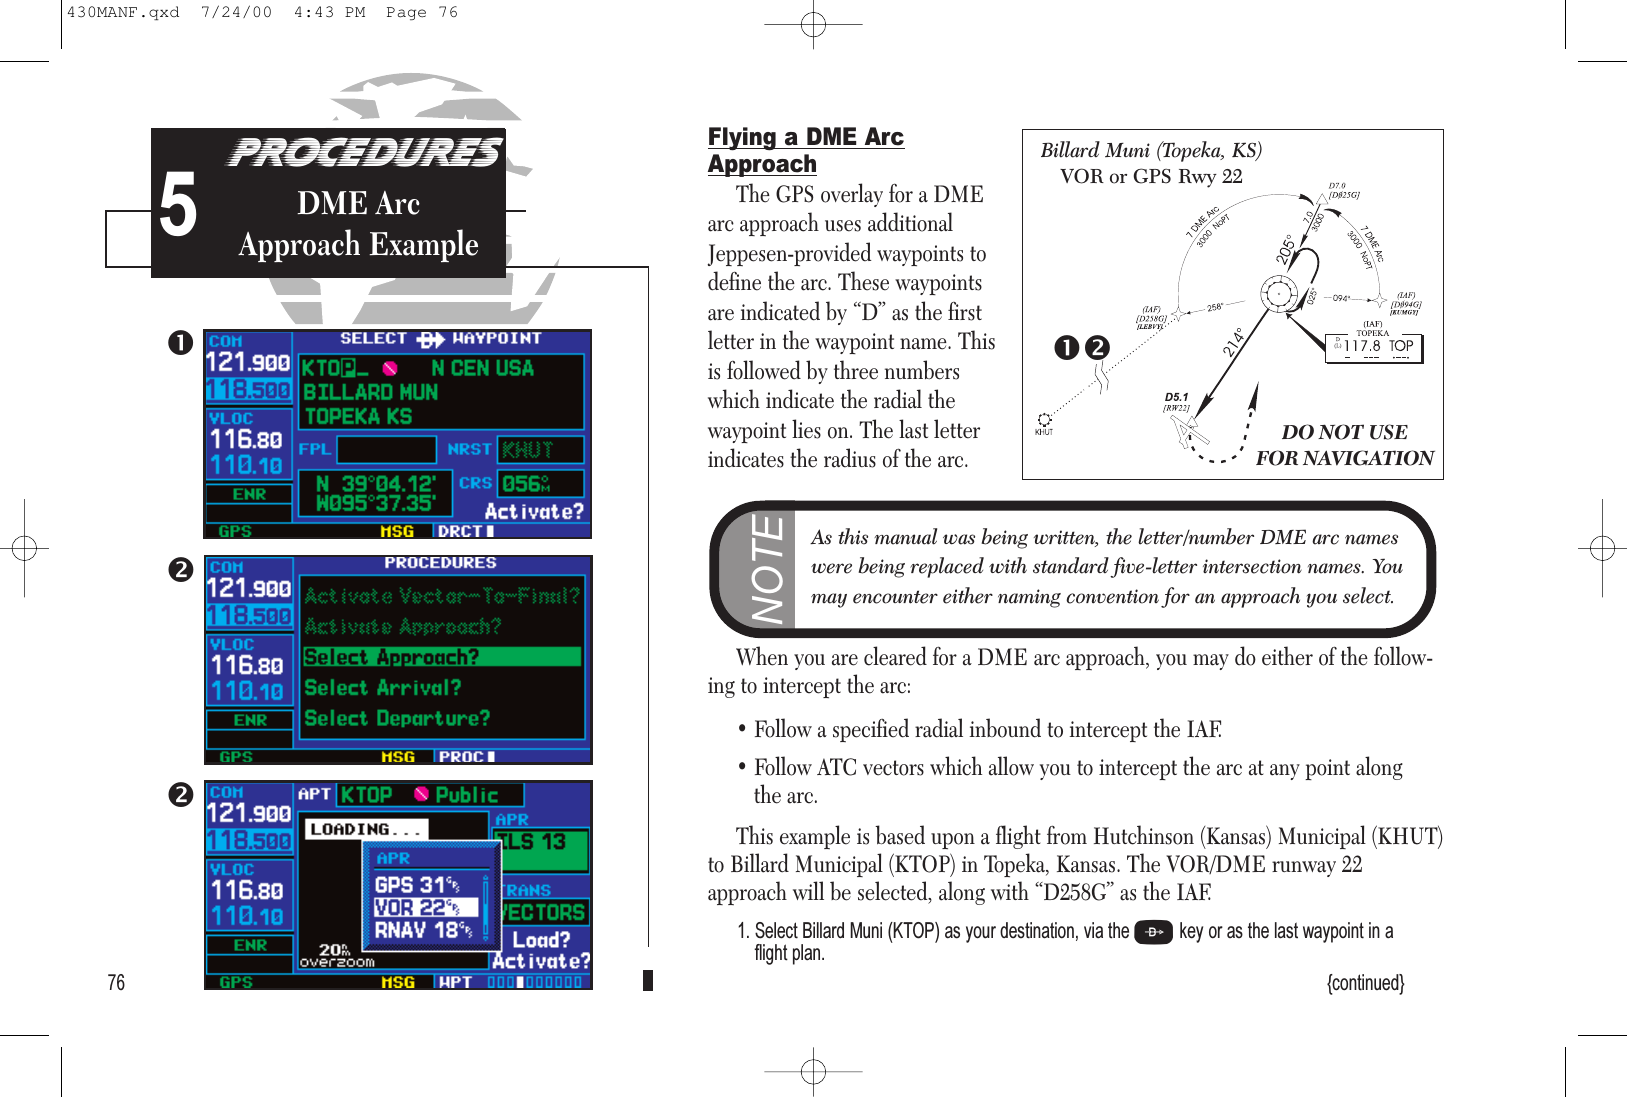 PROCEDURESApproach Examples5Flying a DME ArcApproachThe GPS overlay for a DMEarc approach uses additionalJeppesen-provided waypoints todefine the arc. These waypointsare indicated by “D” as the firstletter in the waypoint name. Thisis followed by three numberswhich indicate the radial the waypoint lies on. The last letterindicates the radius of the arc. When you are cleared for a DME arc approach, you may do either of the follow-ing to intercept the arc:• Follow a specified radial inbound to intercept the IAF.• Follow ATC vectors which allow you to intercept the arc at any point along the arc.This example is based upon a flight from Hutchinson (Kansas) Municipal (KHUT)to Billard Municipal (KTOP) in Topeka, Kansas. The VOR/DME runway 22approach will be selected, along with “D258G” as the IAF.1. Select Billard Muni (KTOP) as your destination, via the Dkey or as the last waypoint in a flight plan.{continued}76PROCEDURESDME Arc Approach Example5DO NOT USEFOR NAVIGATIONBillard Muni (Topeka, KS)VOR or GPS Rwy 22NOTEAs this manual was being written, the letter/number DME arc nameswere being replaced with standard five-letter intersection names. Youmay encounter either naming convention for an approach you select.430MANF.qxd  7/24/00  4:43 PM  Page 76